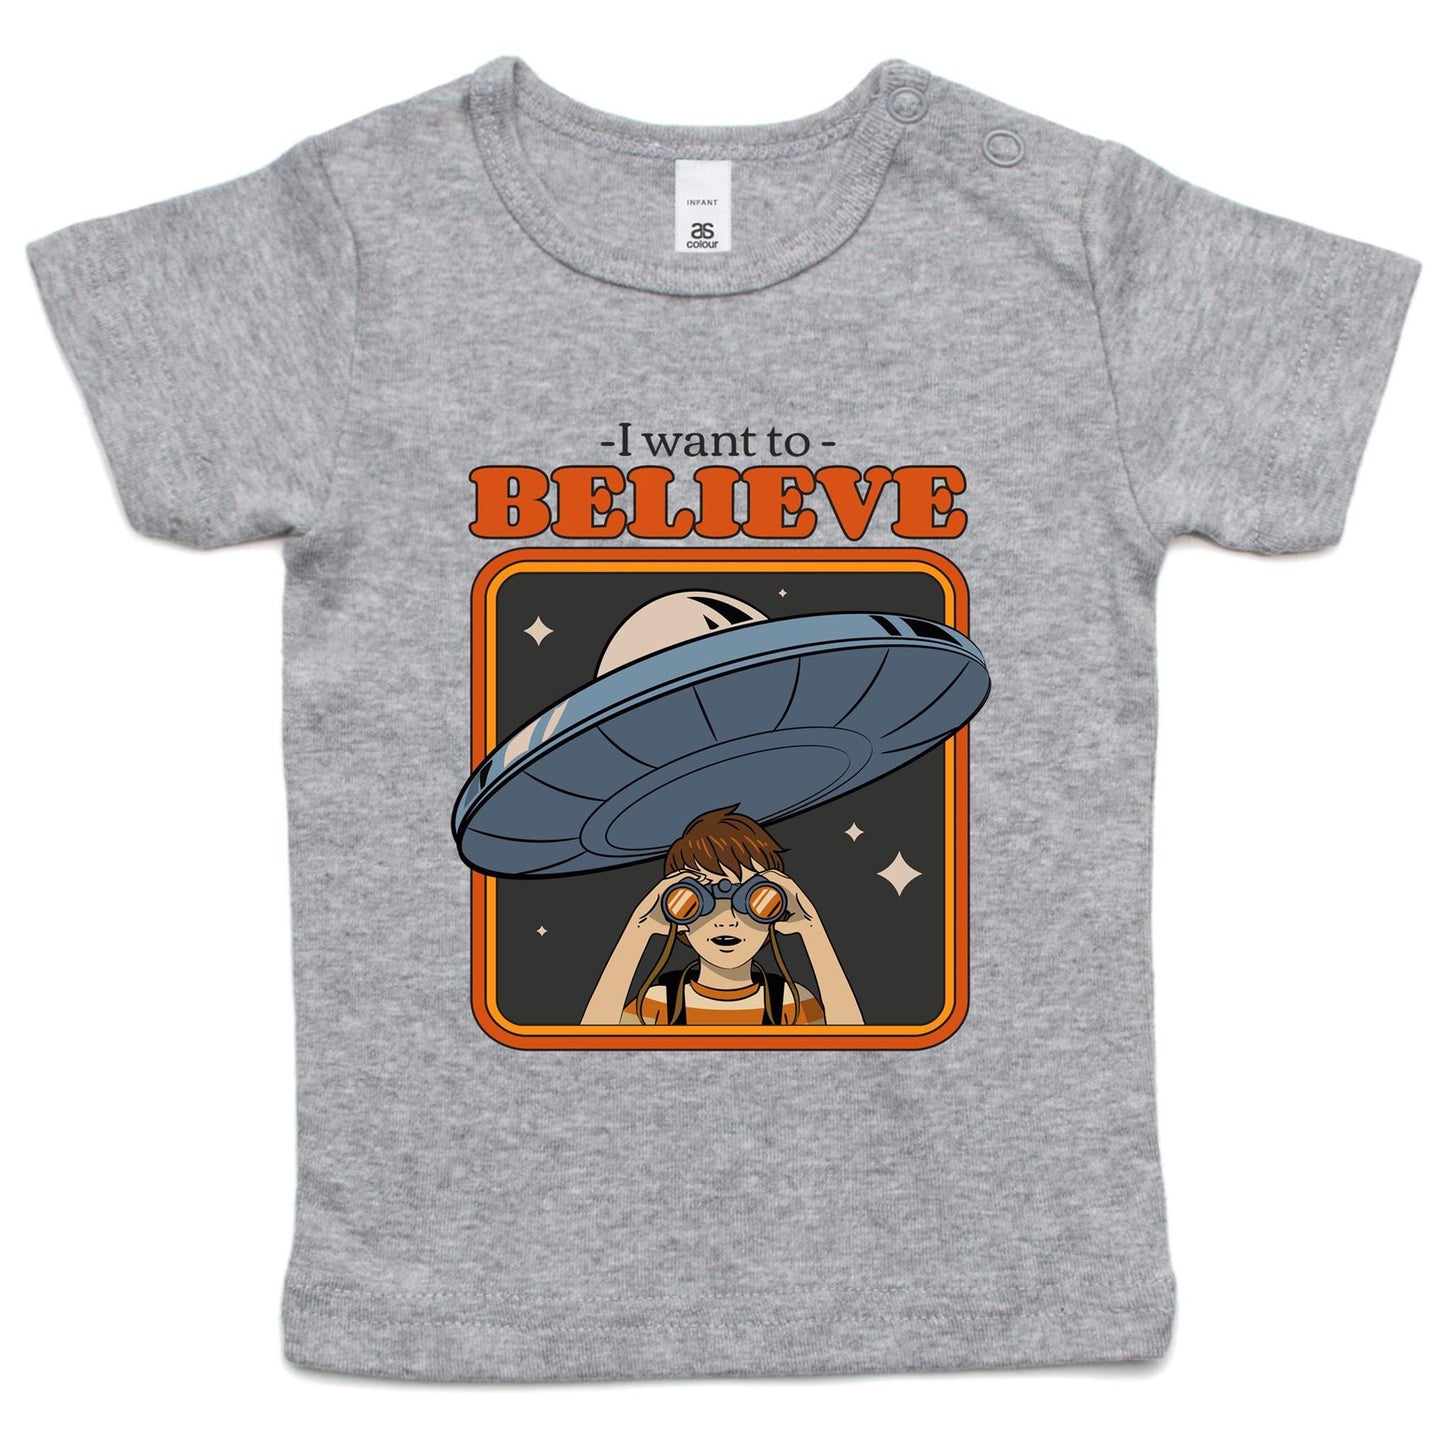 I Want To Believe - Baby T-shirt Grey Marle Baby T-shirt Sci Fi